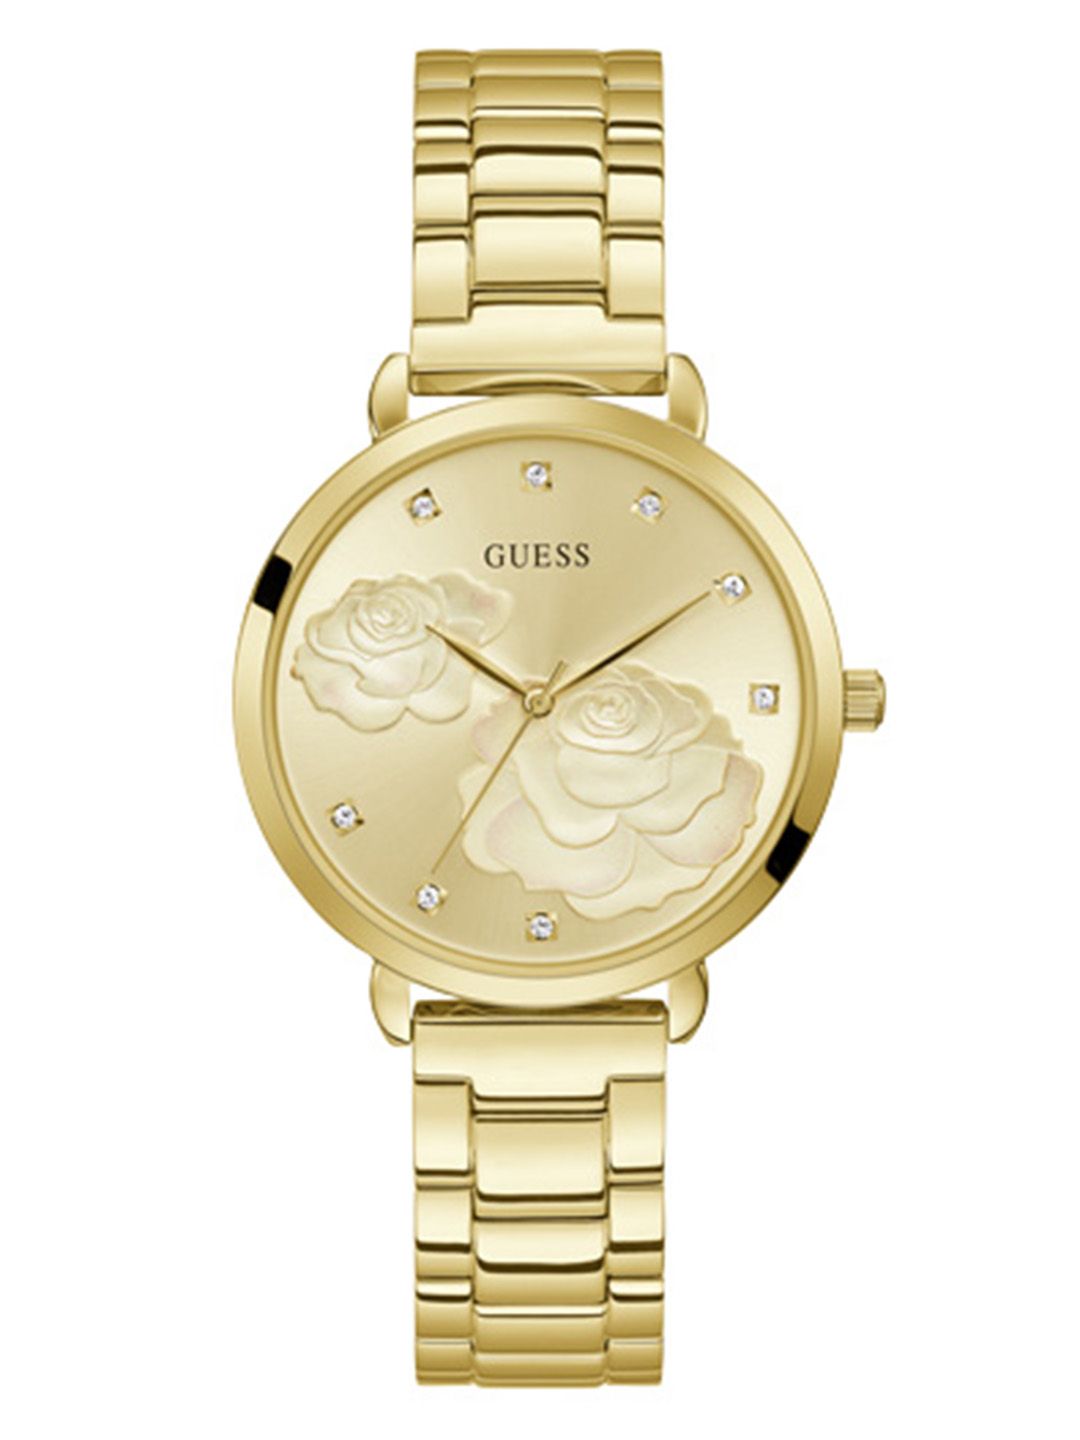 GUESS Women Gold Toned Floral Patterned Swarovski Crystal Studded Analogue Watch GW0242L2 Price in India